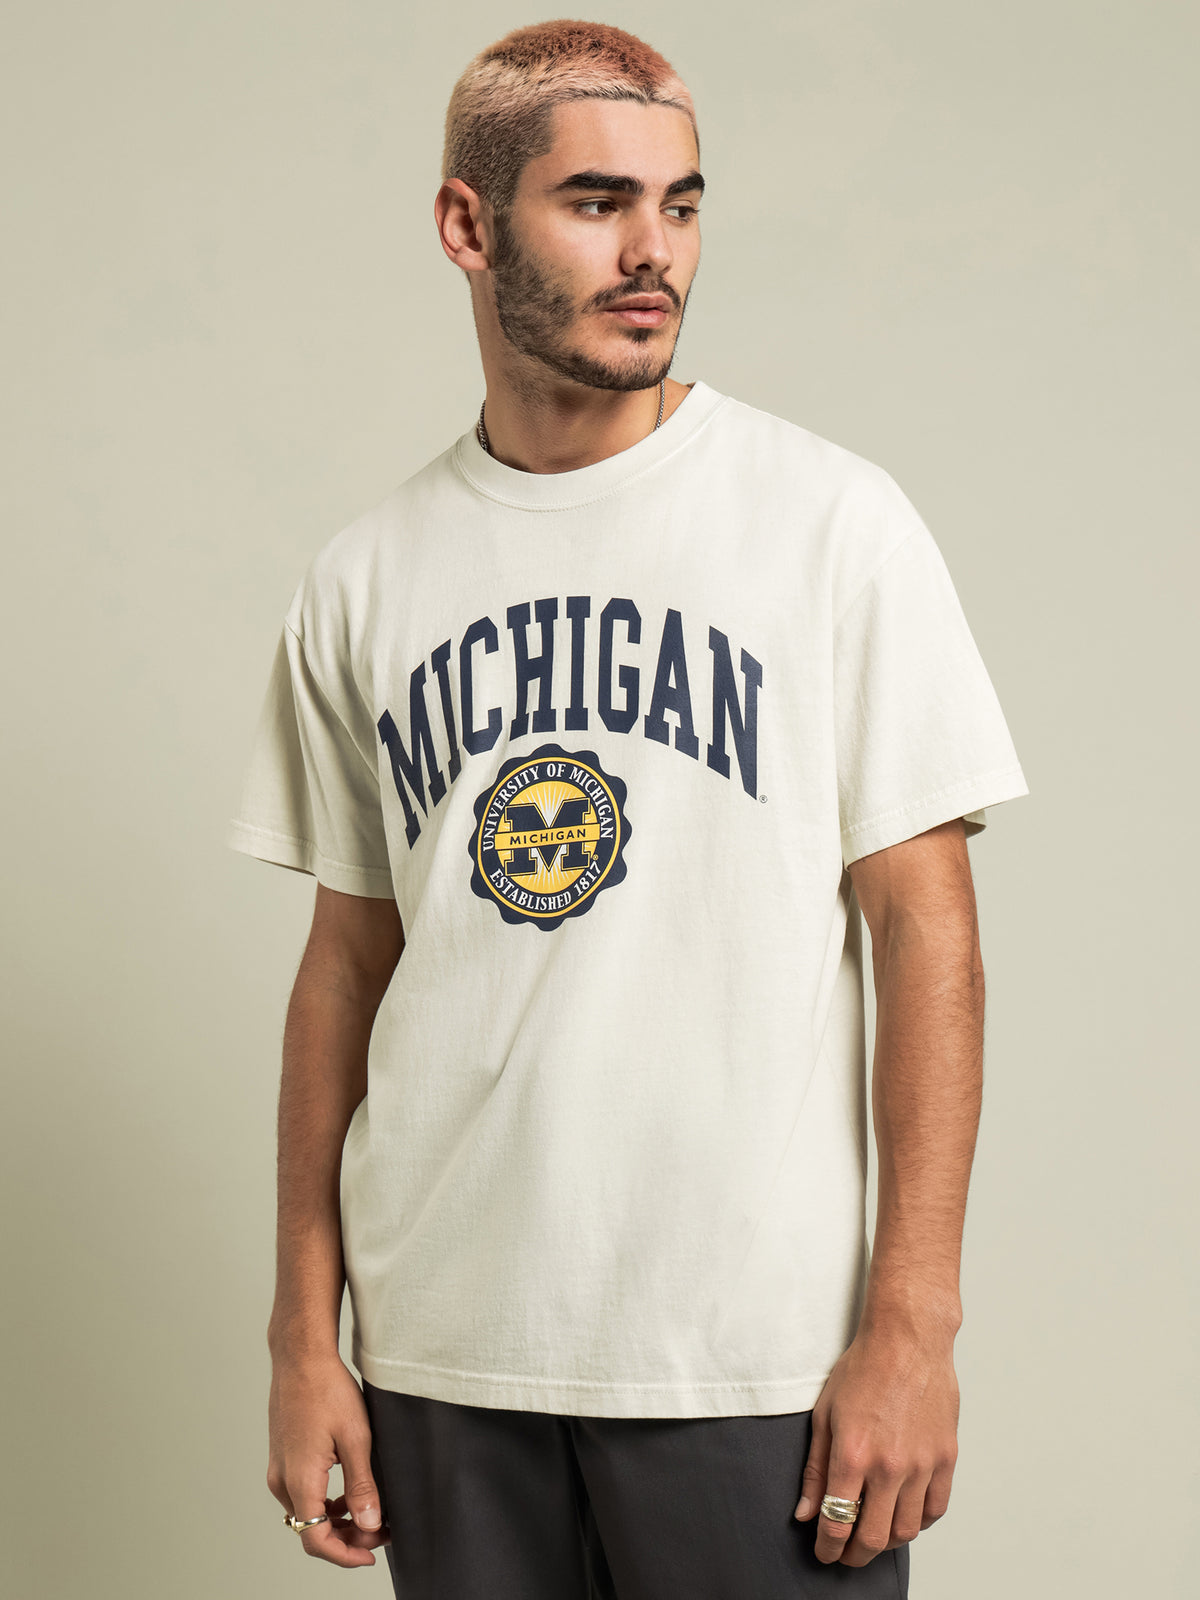 Michigan College Seal T-Shirt in Vintage White